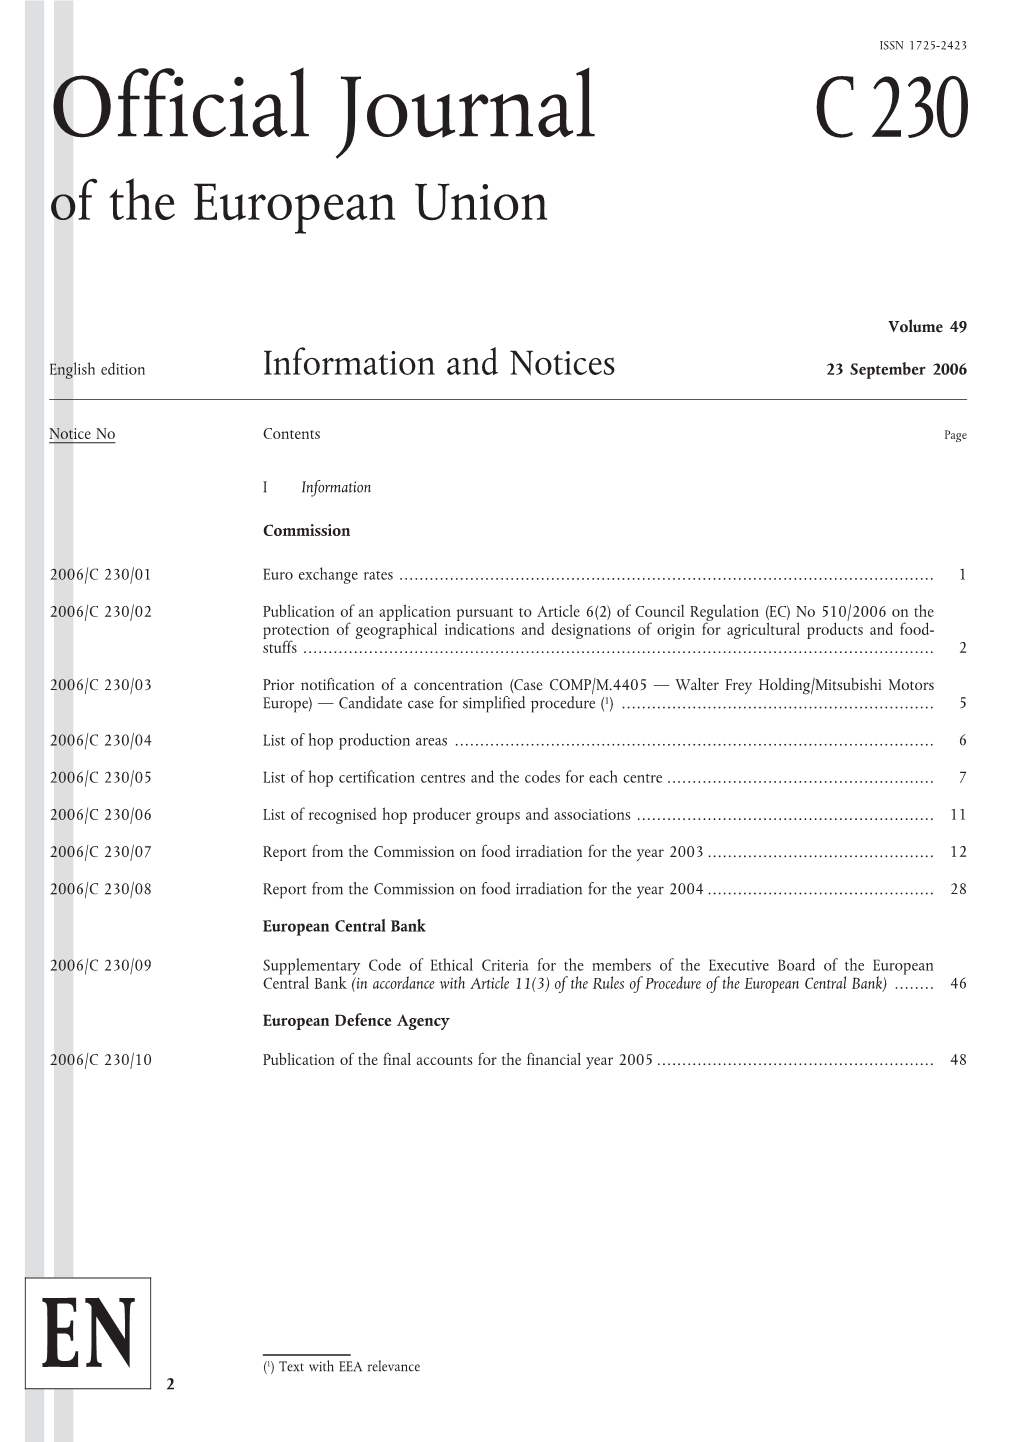 Official Journal C230 of the European Union